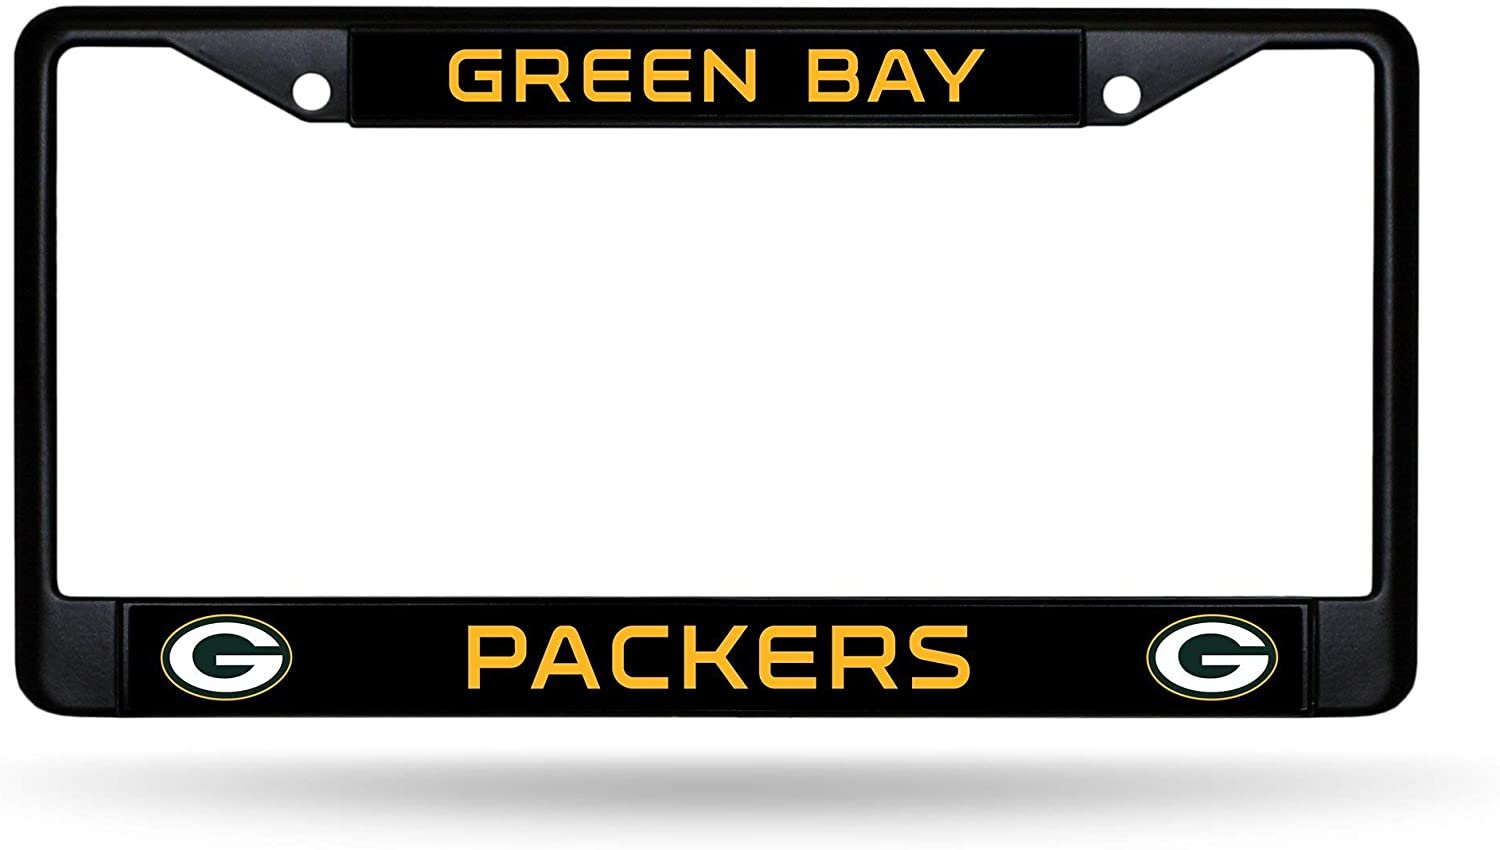 Green Bay Packers Black Metal License Plate Frame Chrome Tag Cover 6x12 Inch